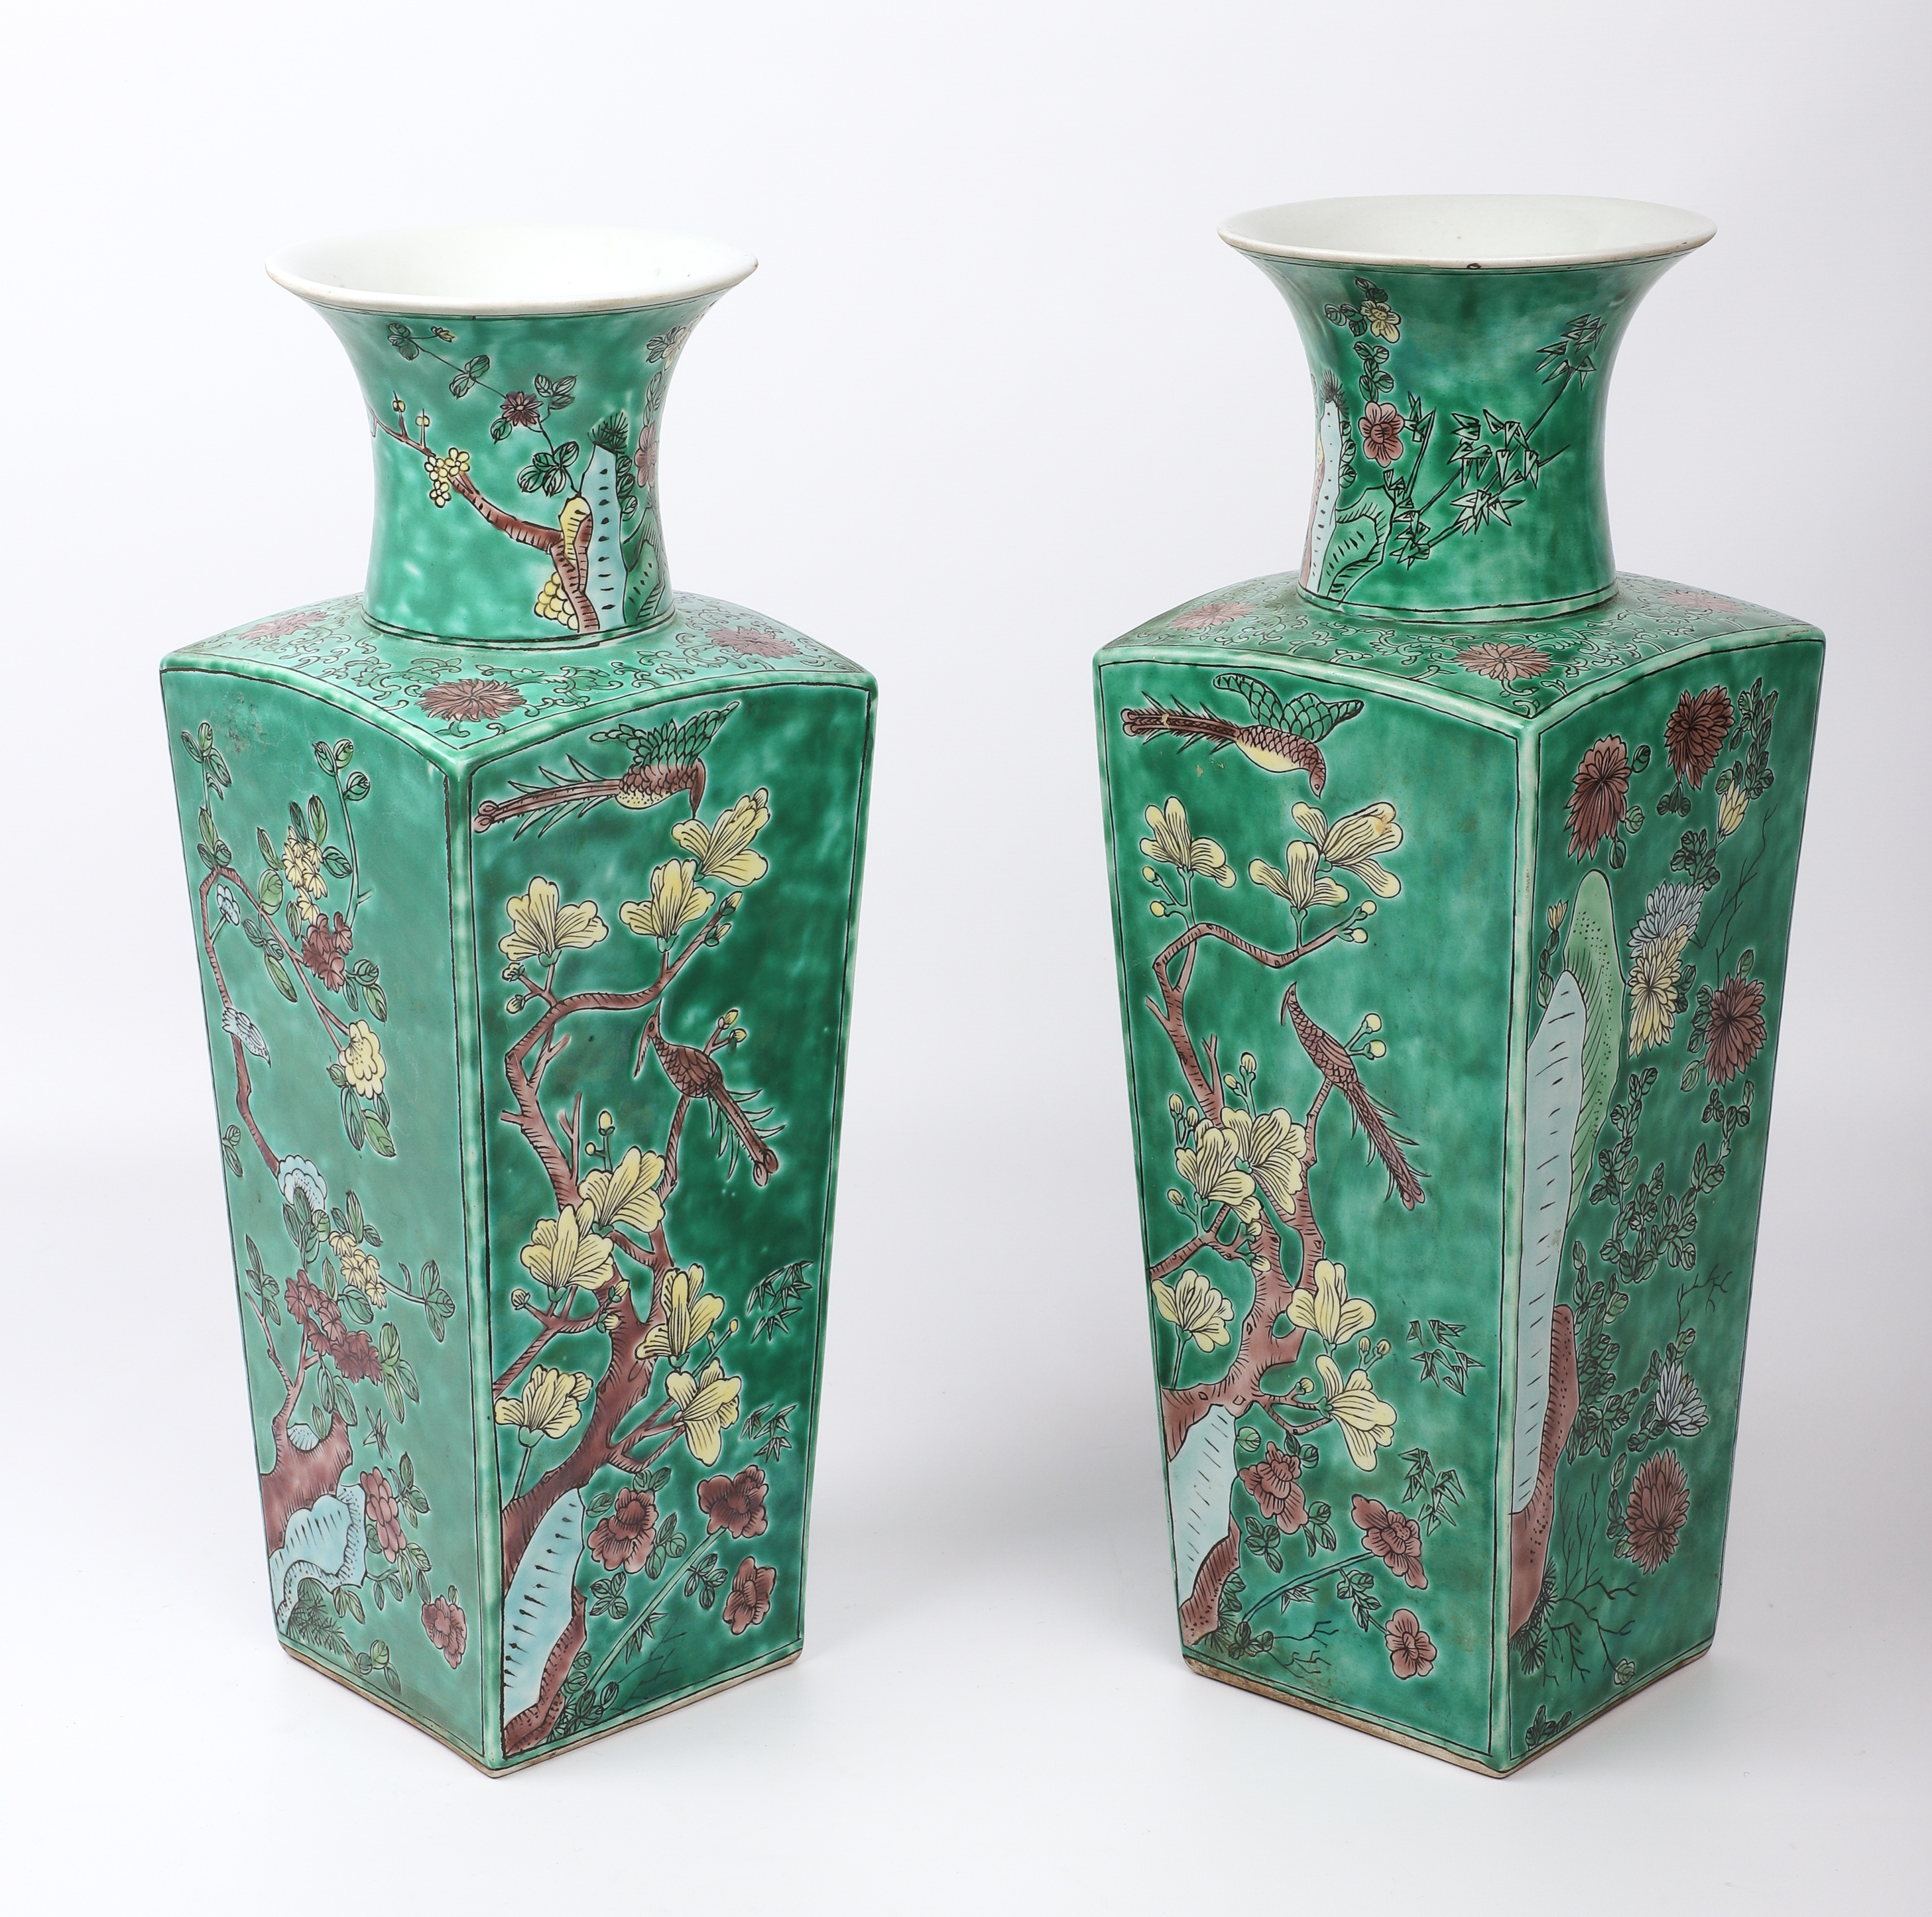 Pair of Chinese porcelain vases  3b1599